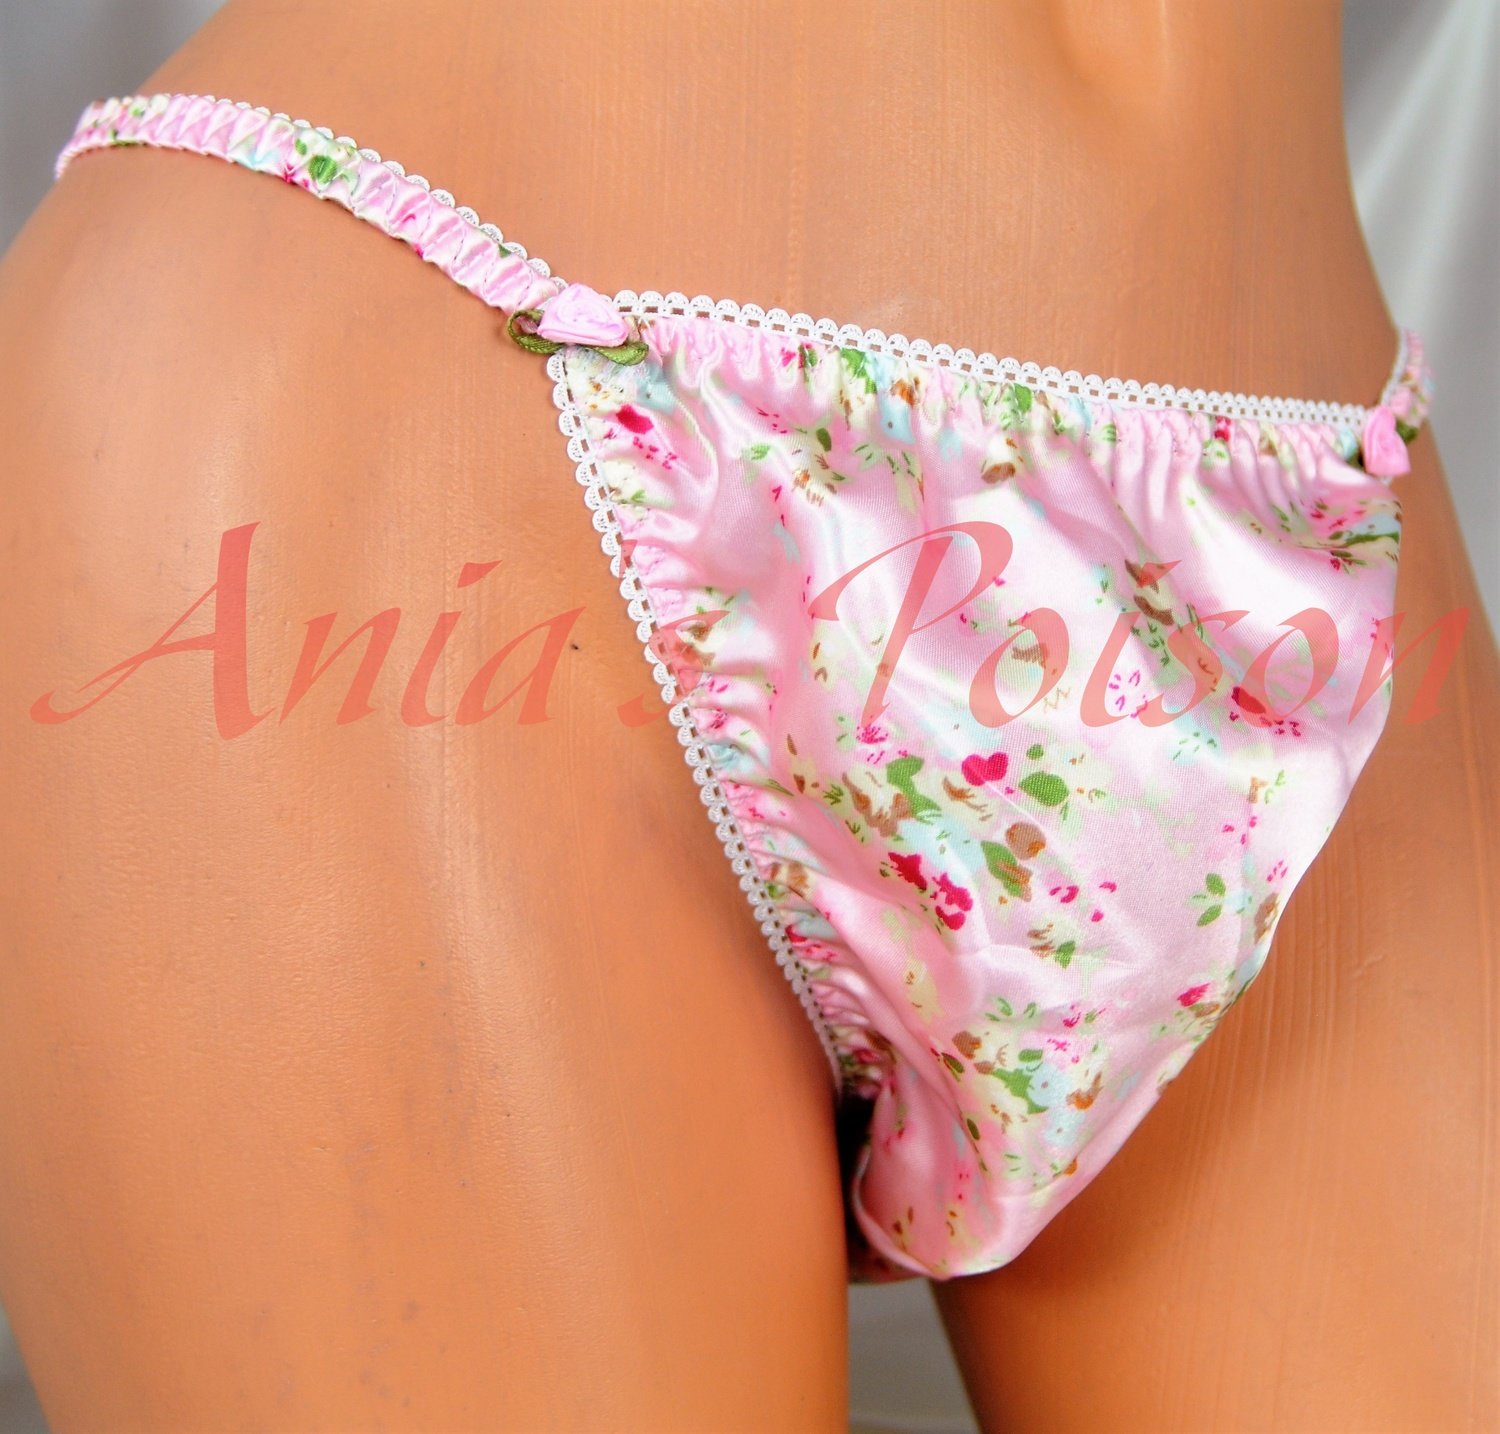 Ania S Poison Manties S Xxl Floral Easter Novelty Prints